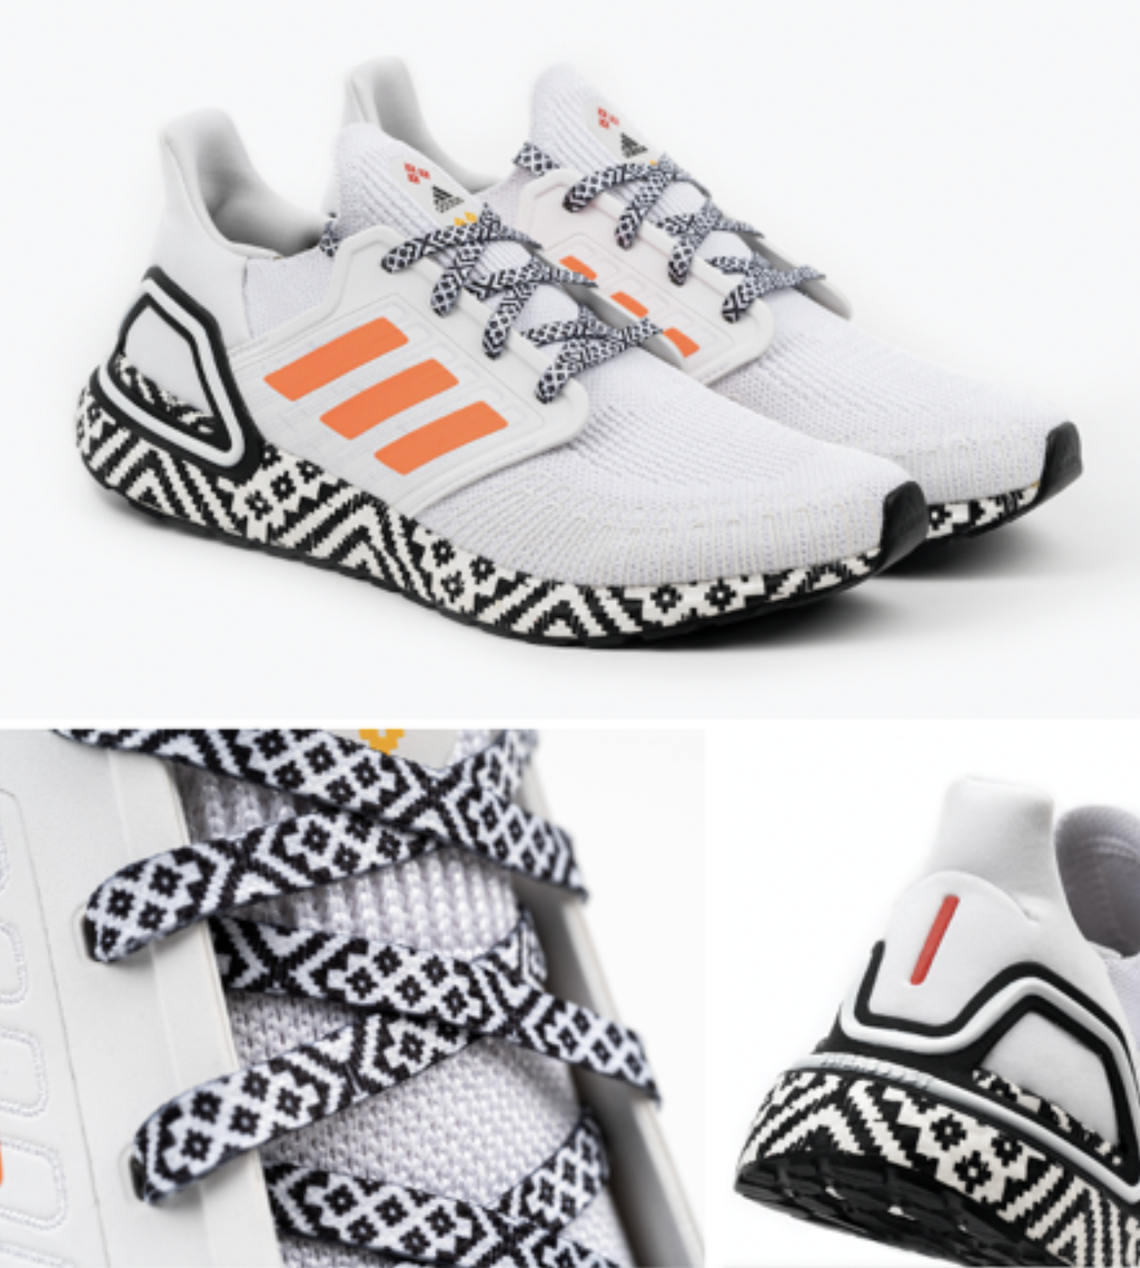 adidas weave UltraBOOST DNA City Pack Southeast Asia 2021 5